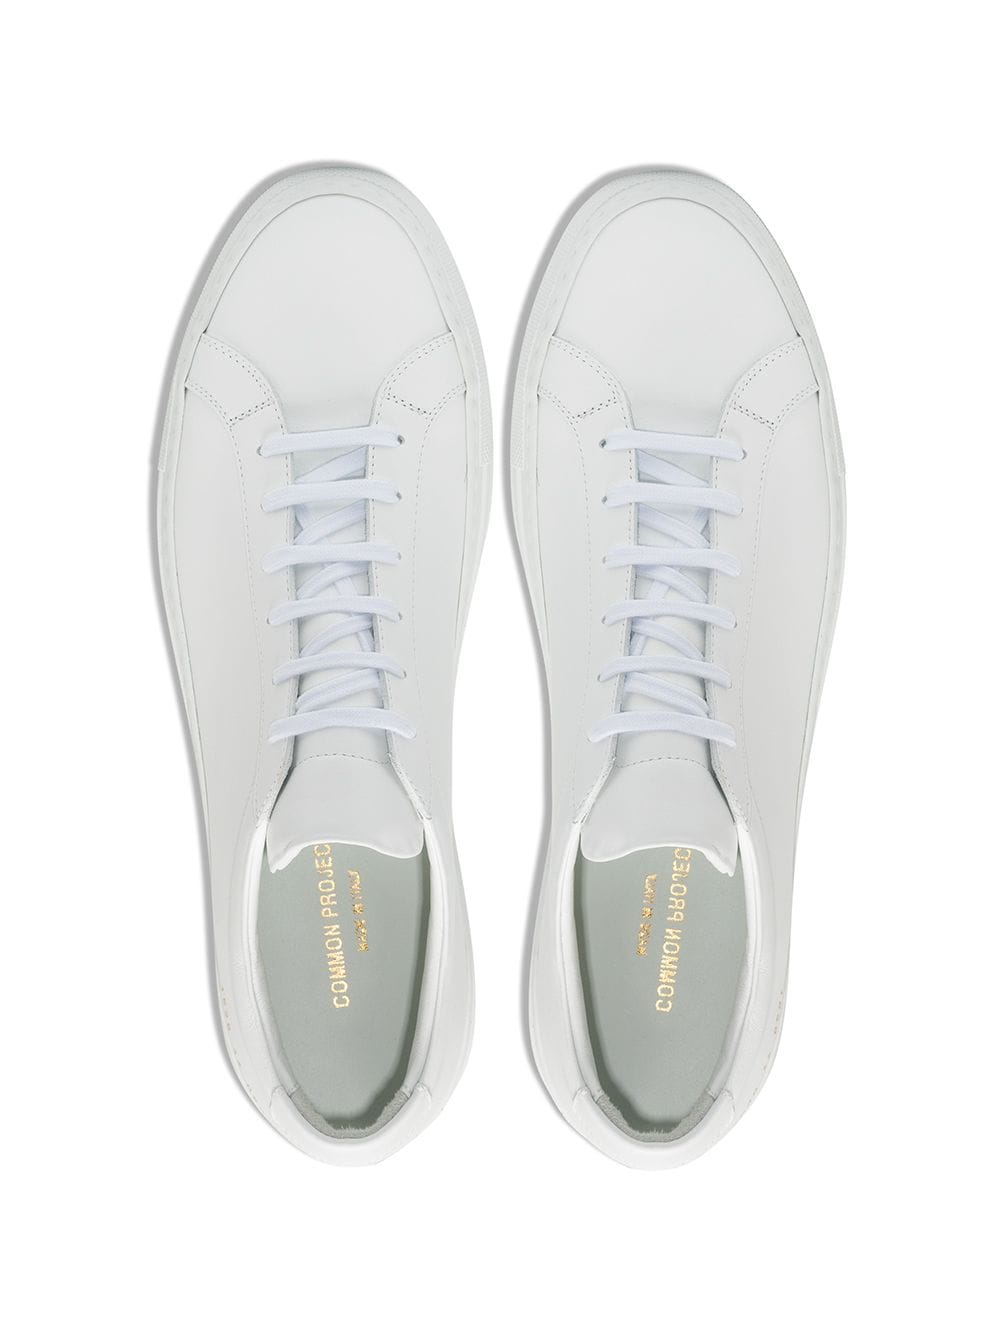 COMMON PROJECTS COMMON PROJECTS- Original Achilles Low Sneaker